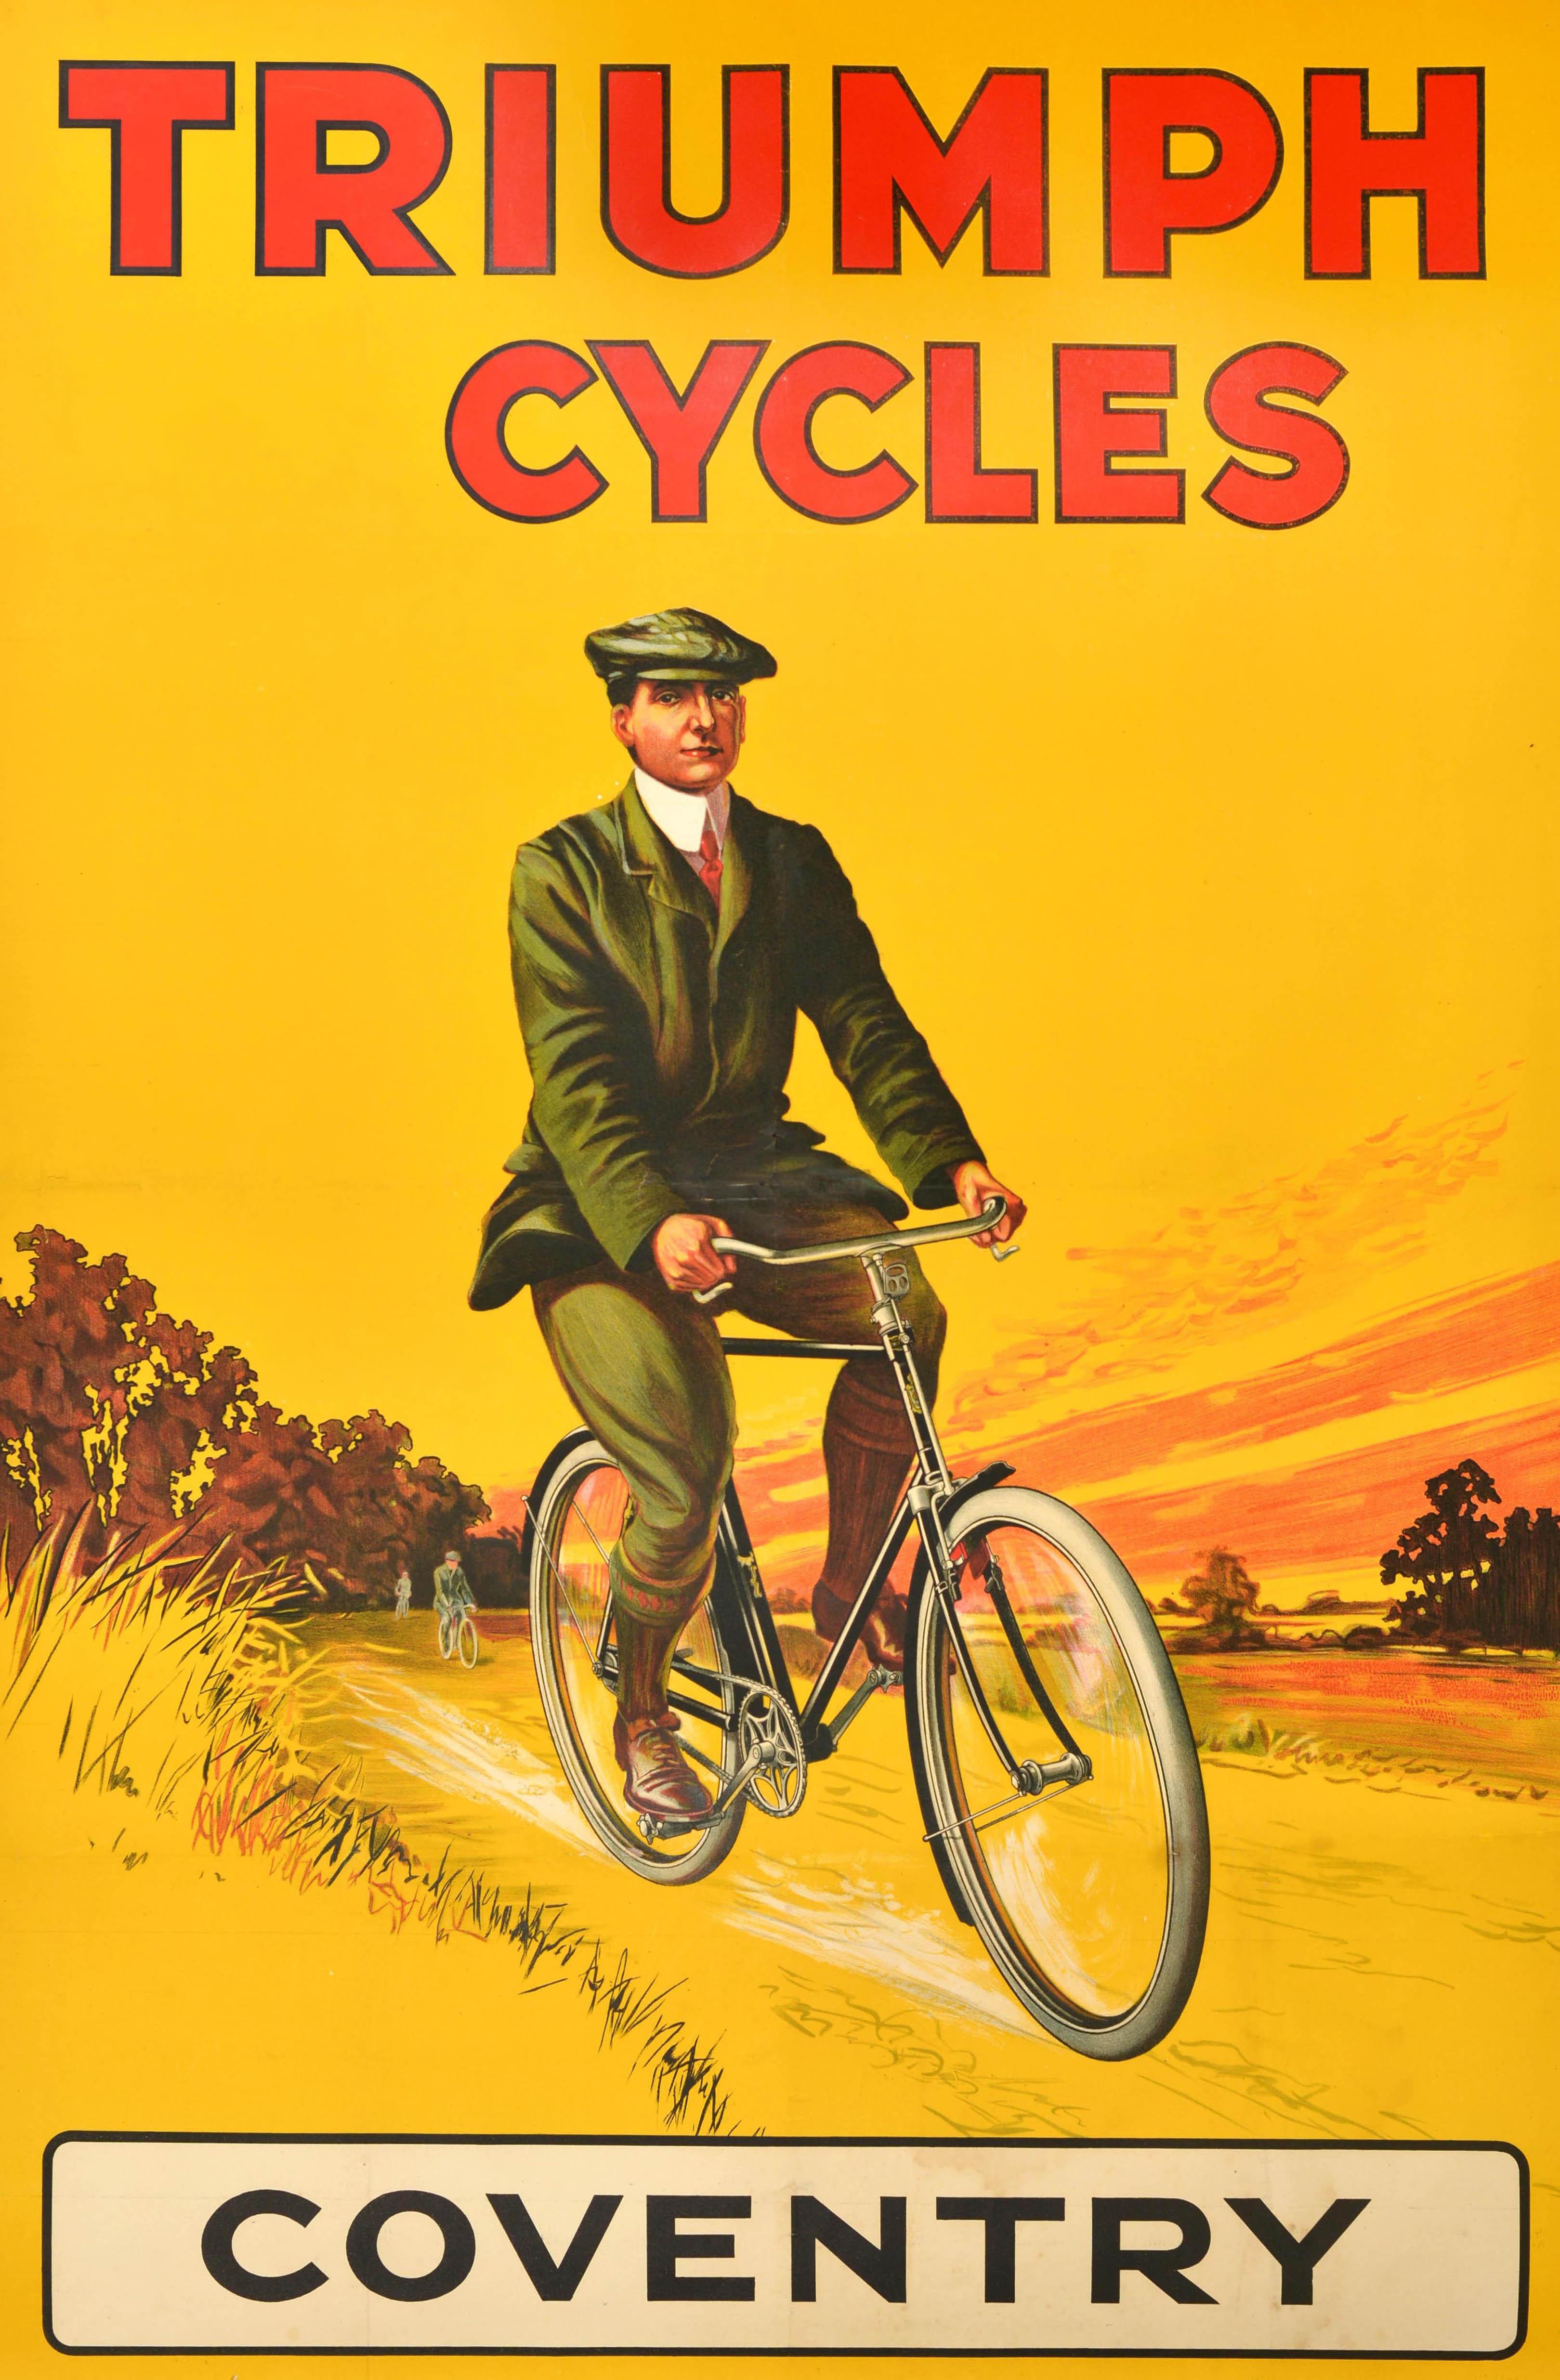 Original antique advertising poster for Triumph Cycles Coventry featuring an illustration of a gentleman in a suit and cap riding a bicycle on a country road in front of another cyclist and trees in the distance against a yellow and orange